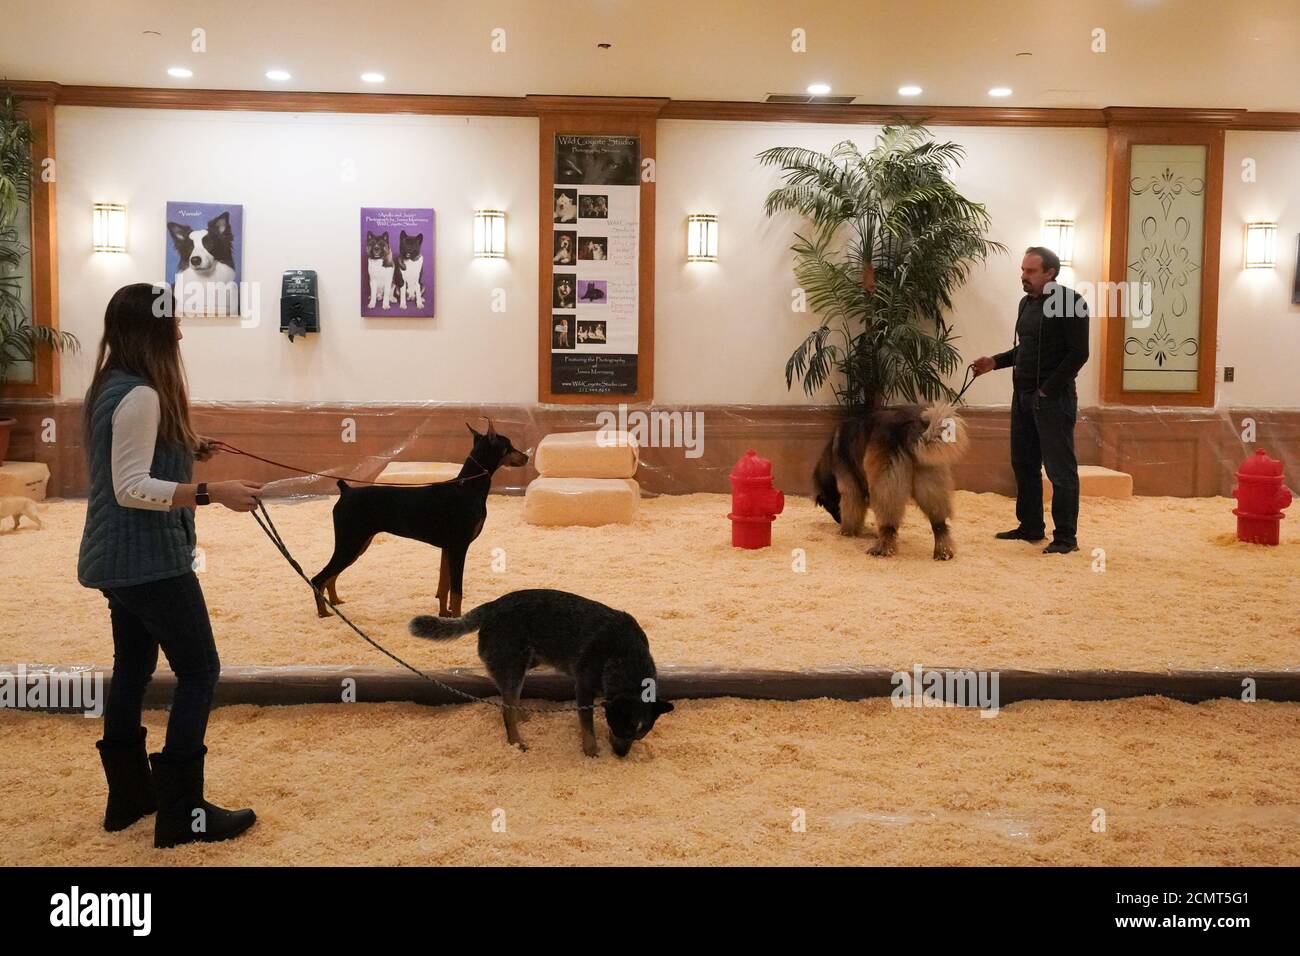 Dogs use the indoor bathroom after arriving to the Pennsylvania Hotel for the annual Westminster Dog Show in New York, U.S., February 7, 2020. REUTERS/Bryan R Smith Stock Photo